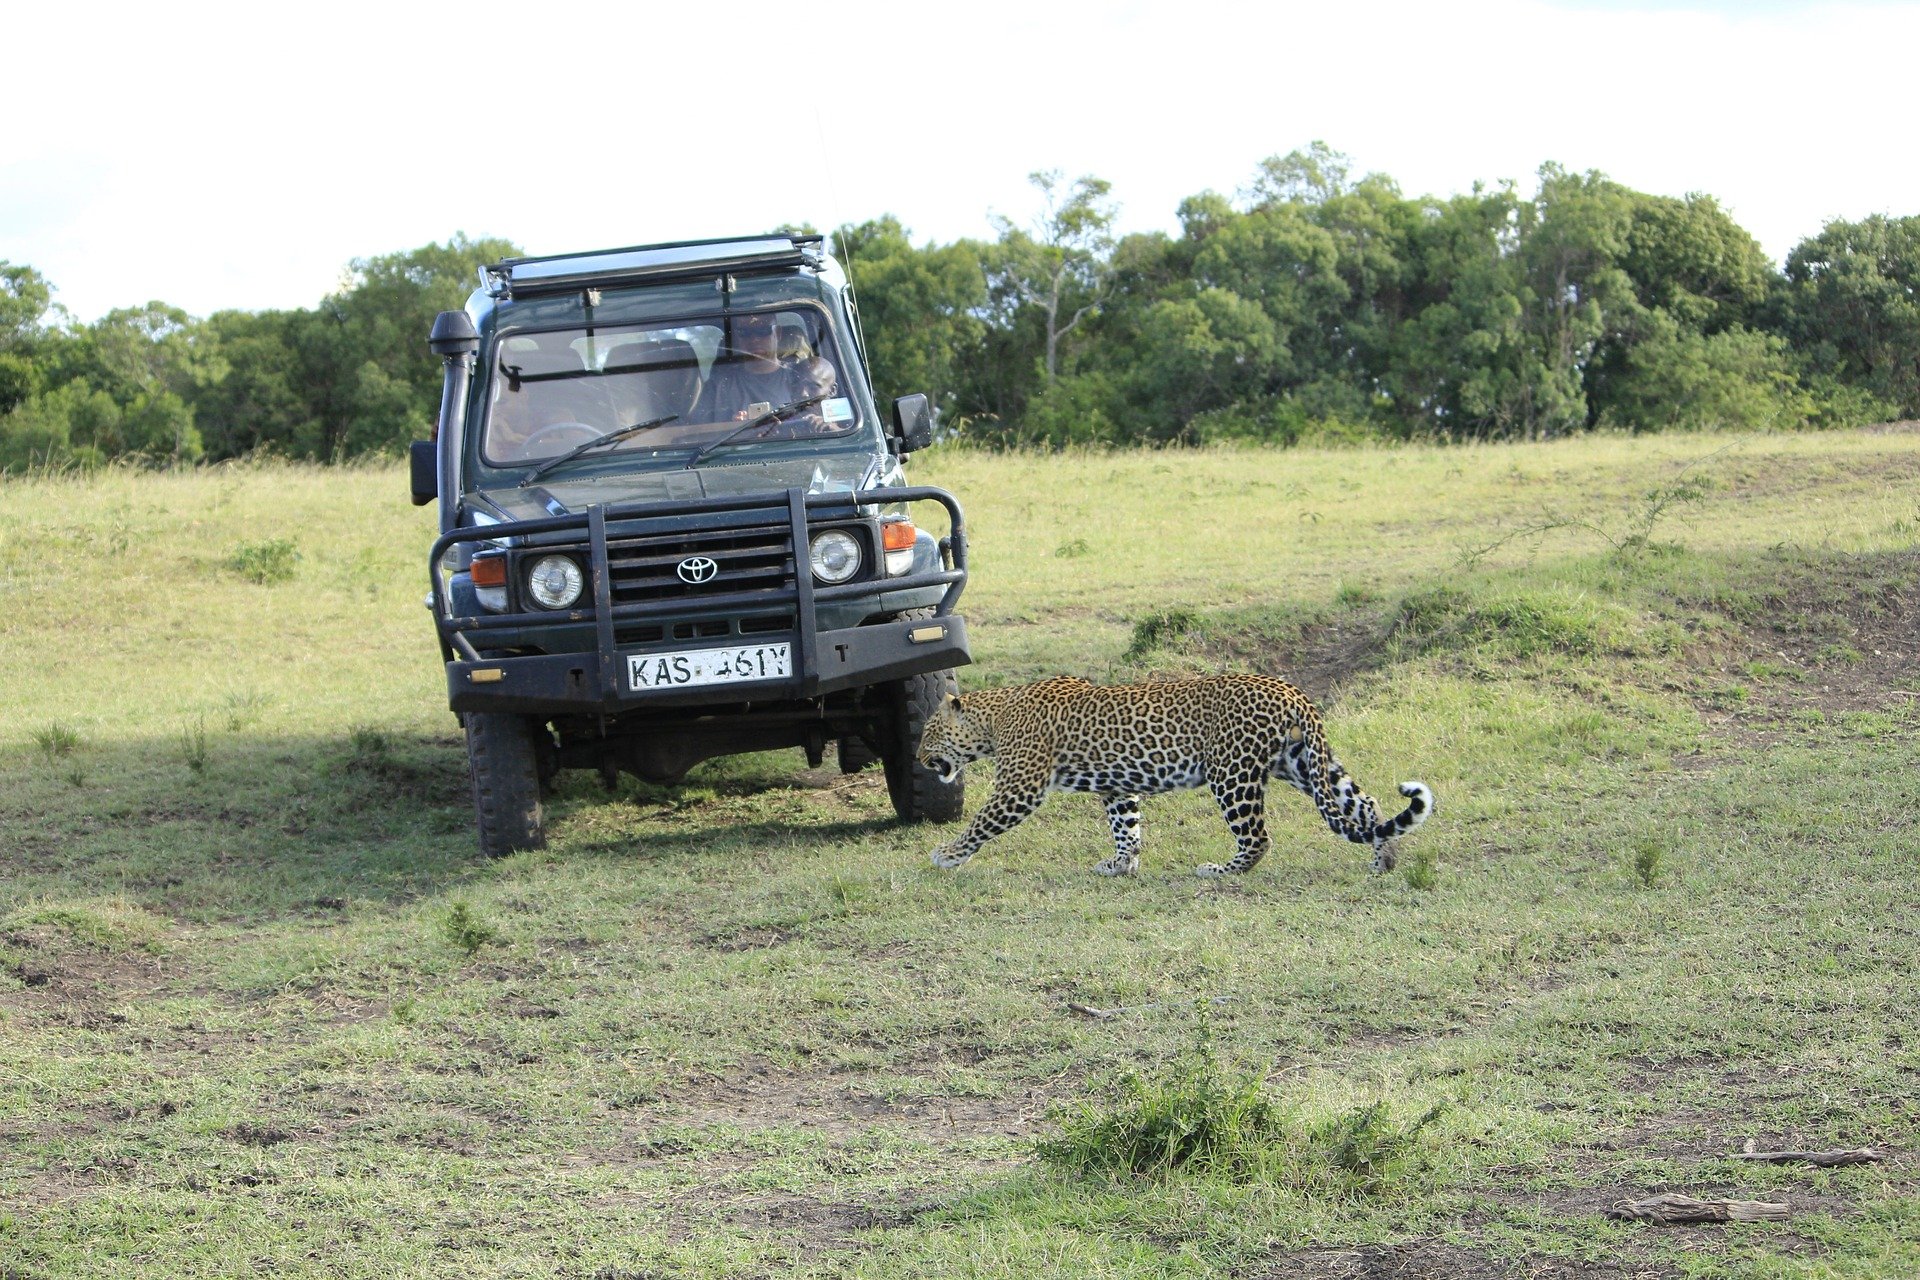 Leopard in front of safari vehicle